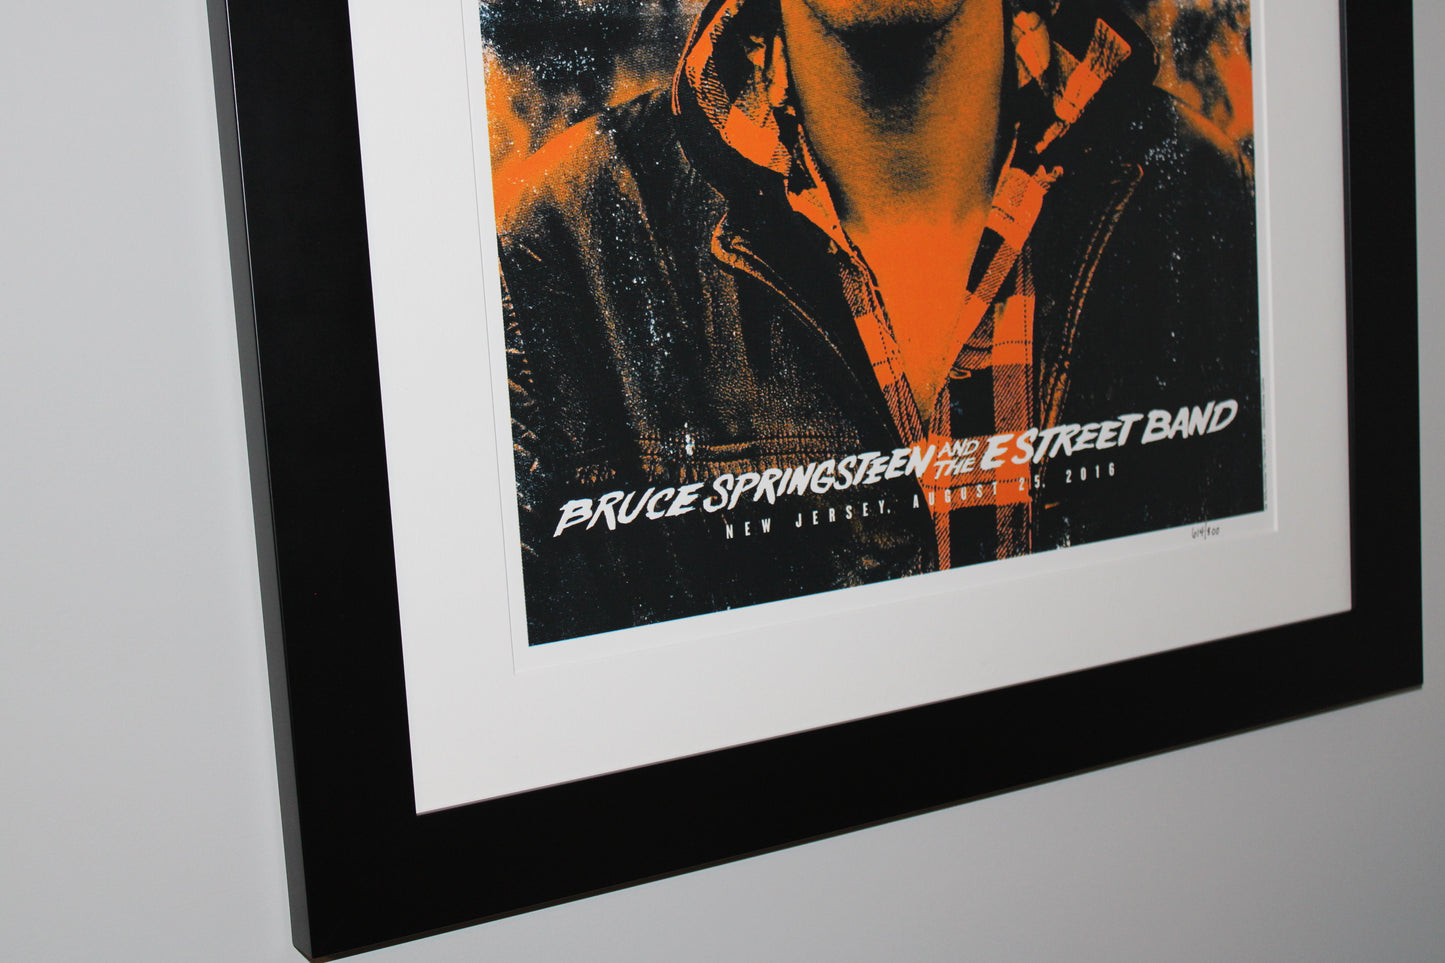 Bruce Springsteen - Original Lithograph - The River Tour 2016 New Jersey - Collectible Limited Edition – Numbered